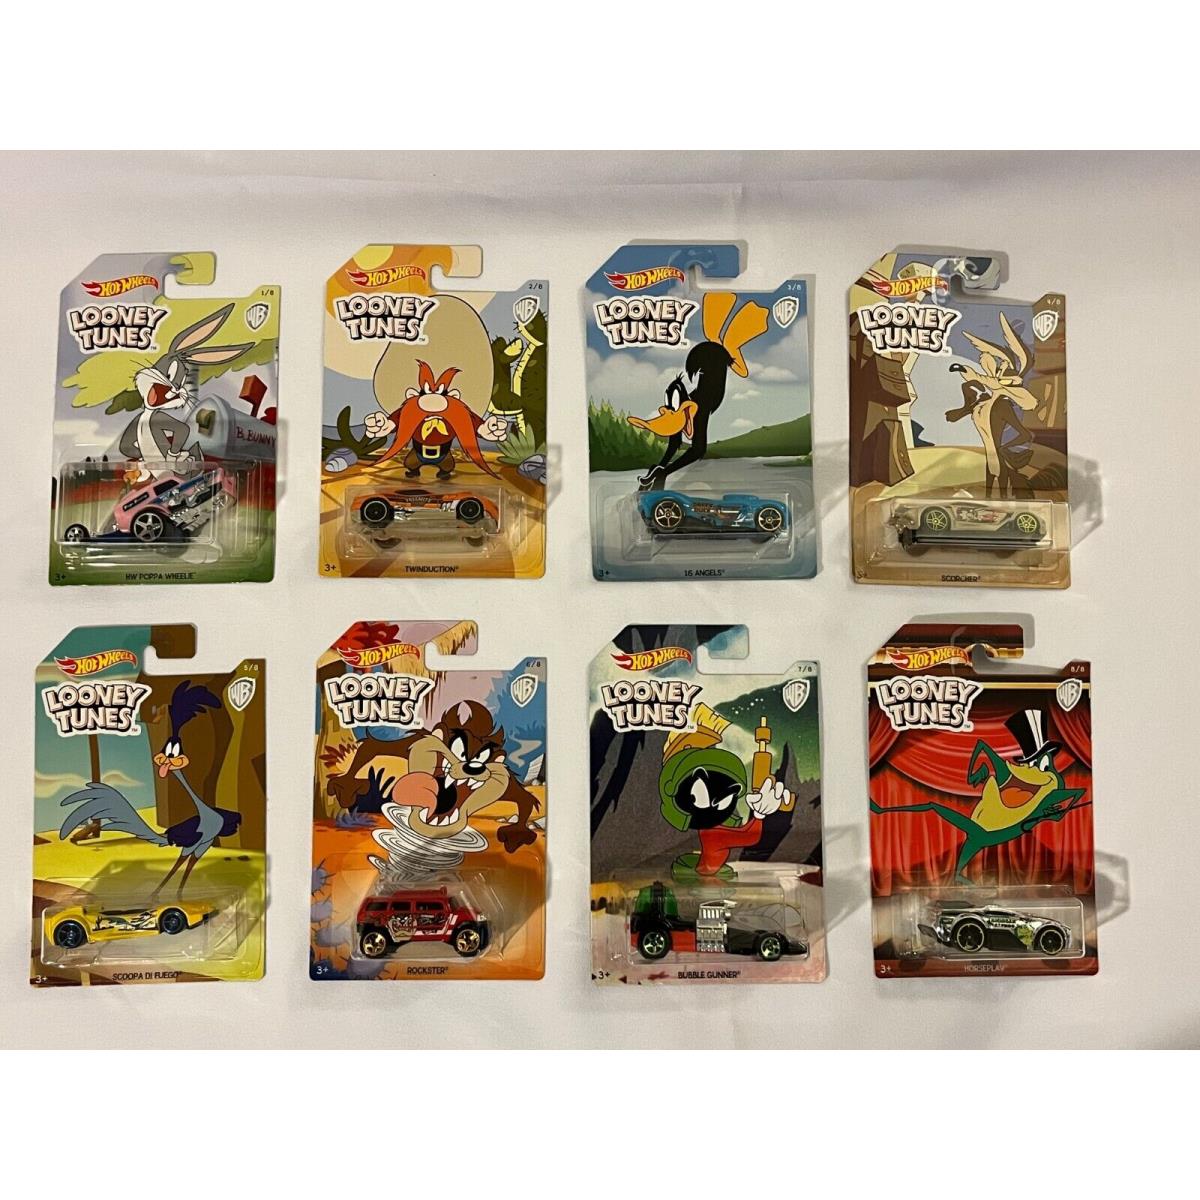 Looney Tunes 2017 Hot Wheels Set of 8 Die-cast Cars - Mint on Card